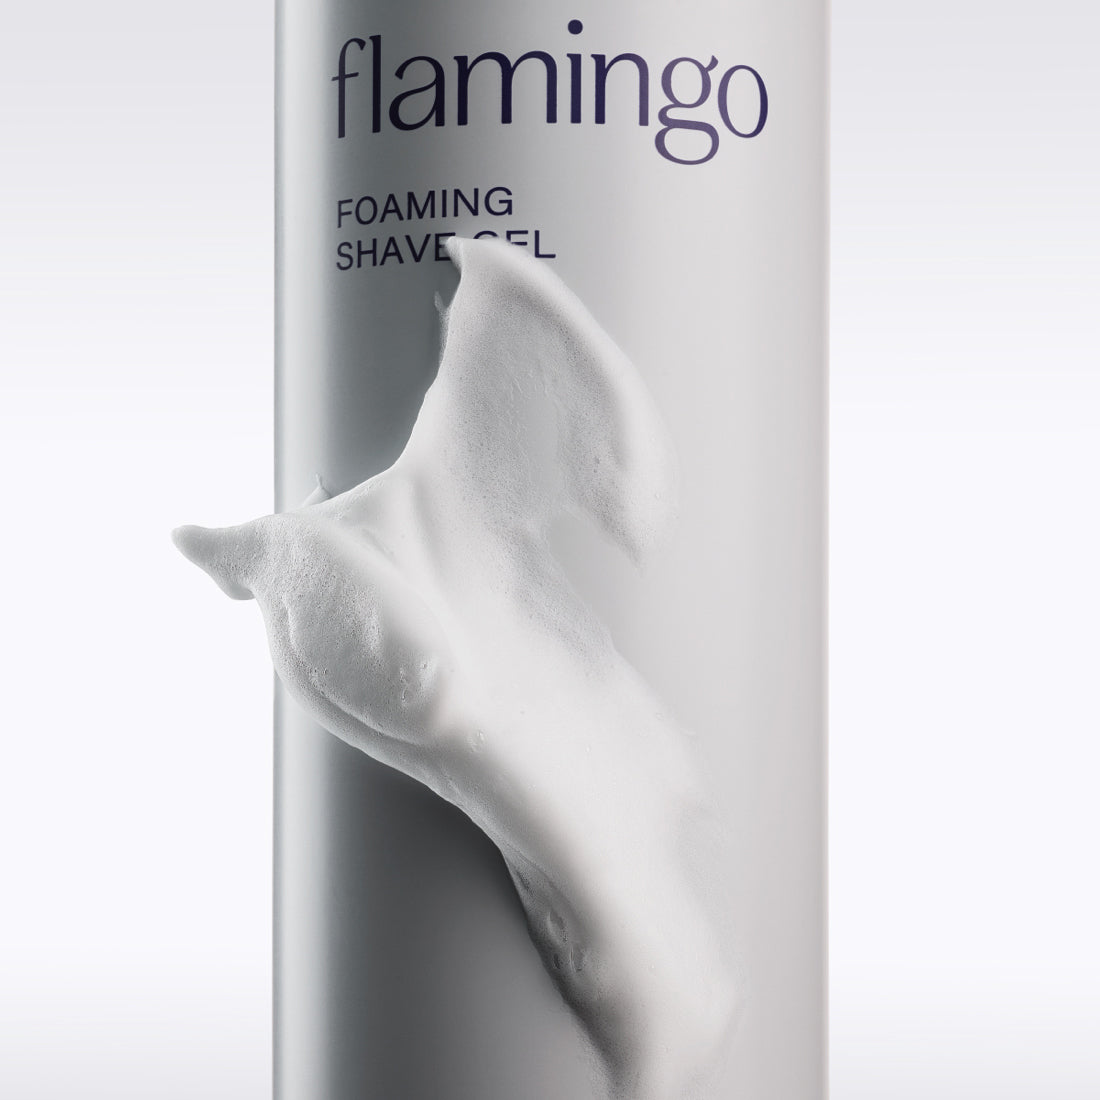 Close up of the Flamingo Foaming Shave Gel can with a swoosh of shave gel on it